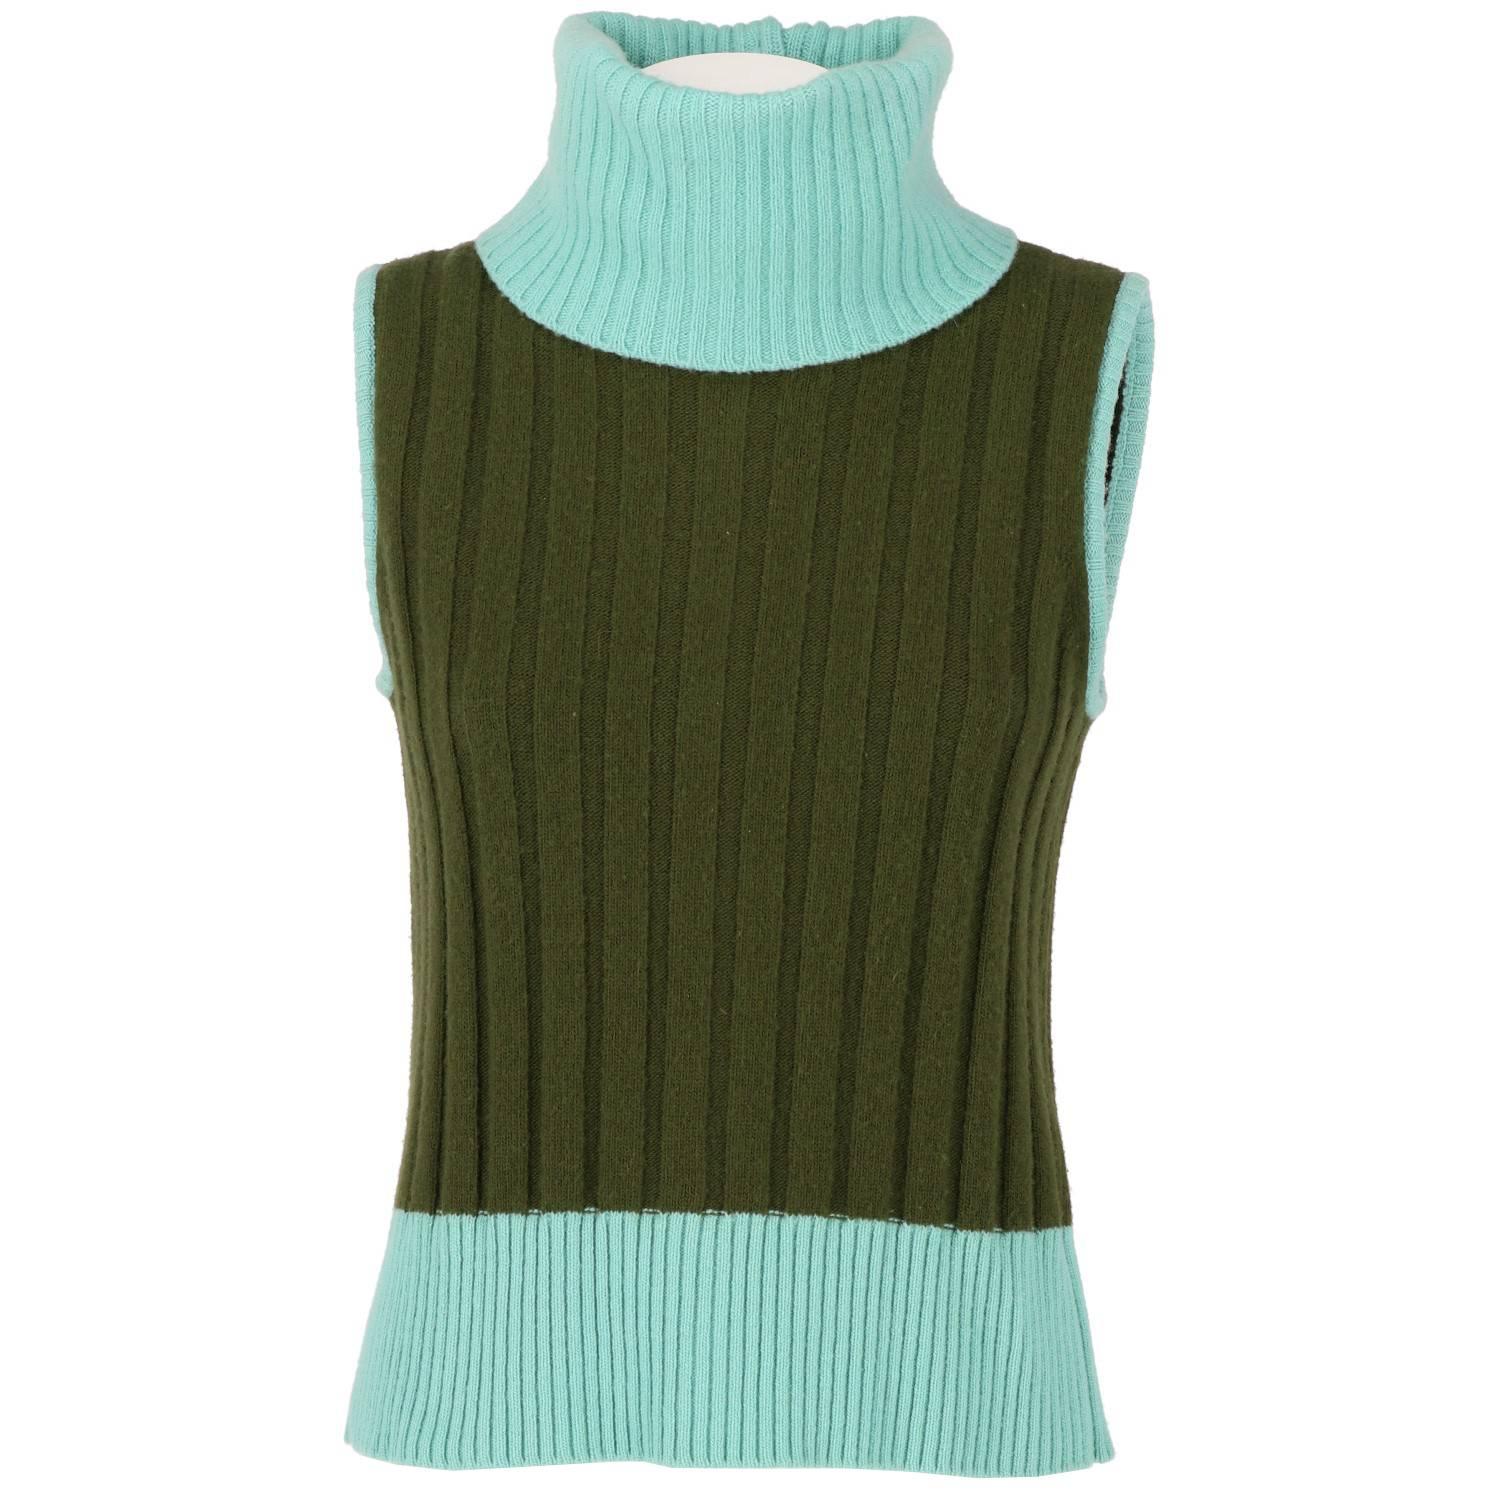 1990s Gianni Versace Green Knitted Vintage Top